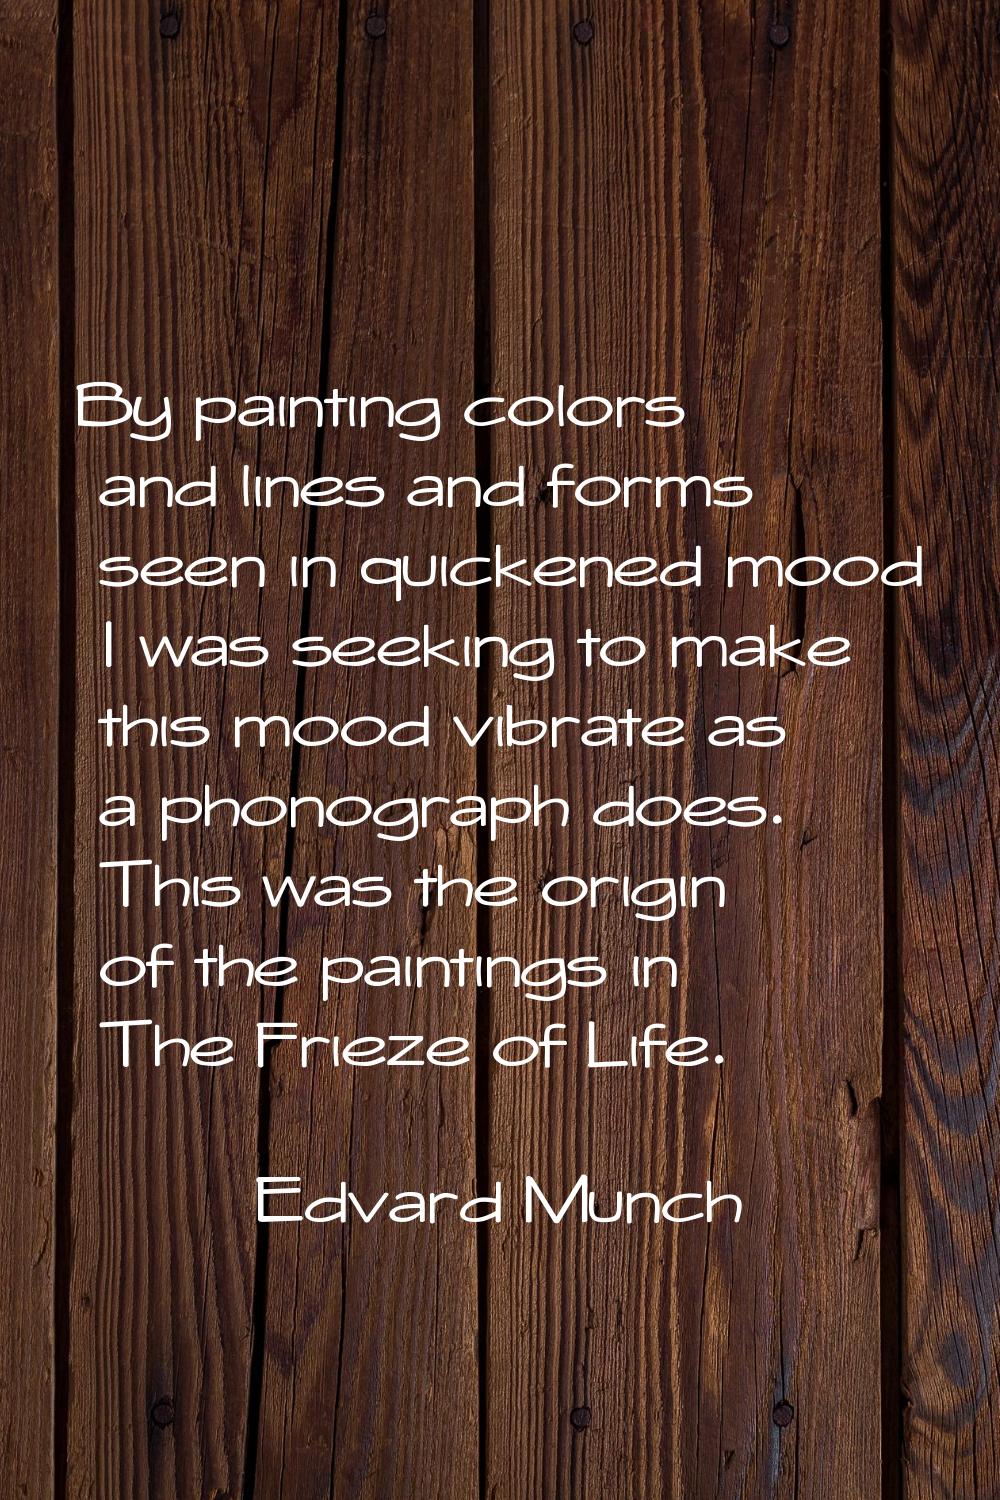 By painting colors and lines and forms seen in quickened mood I was seeking to make this mood vibra